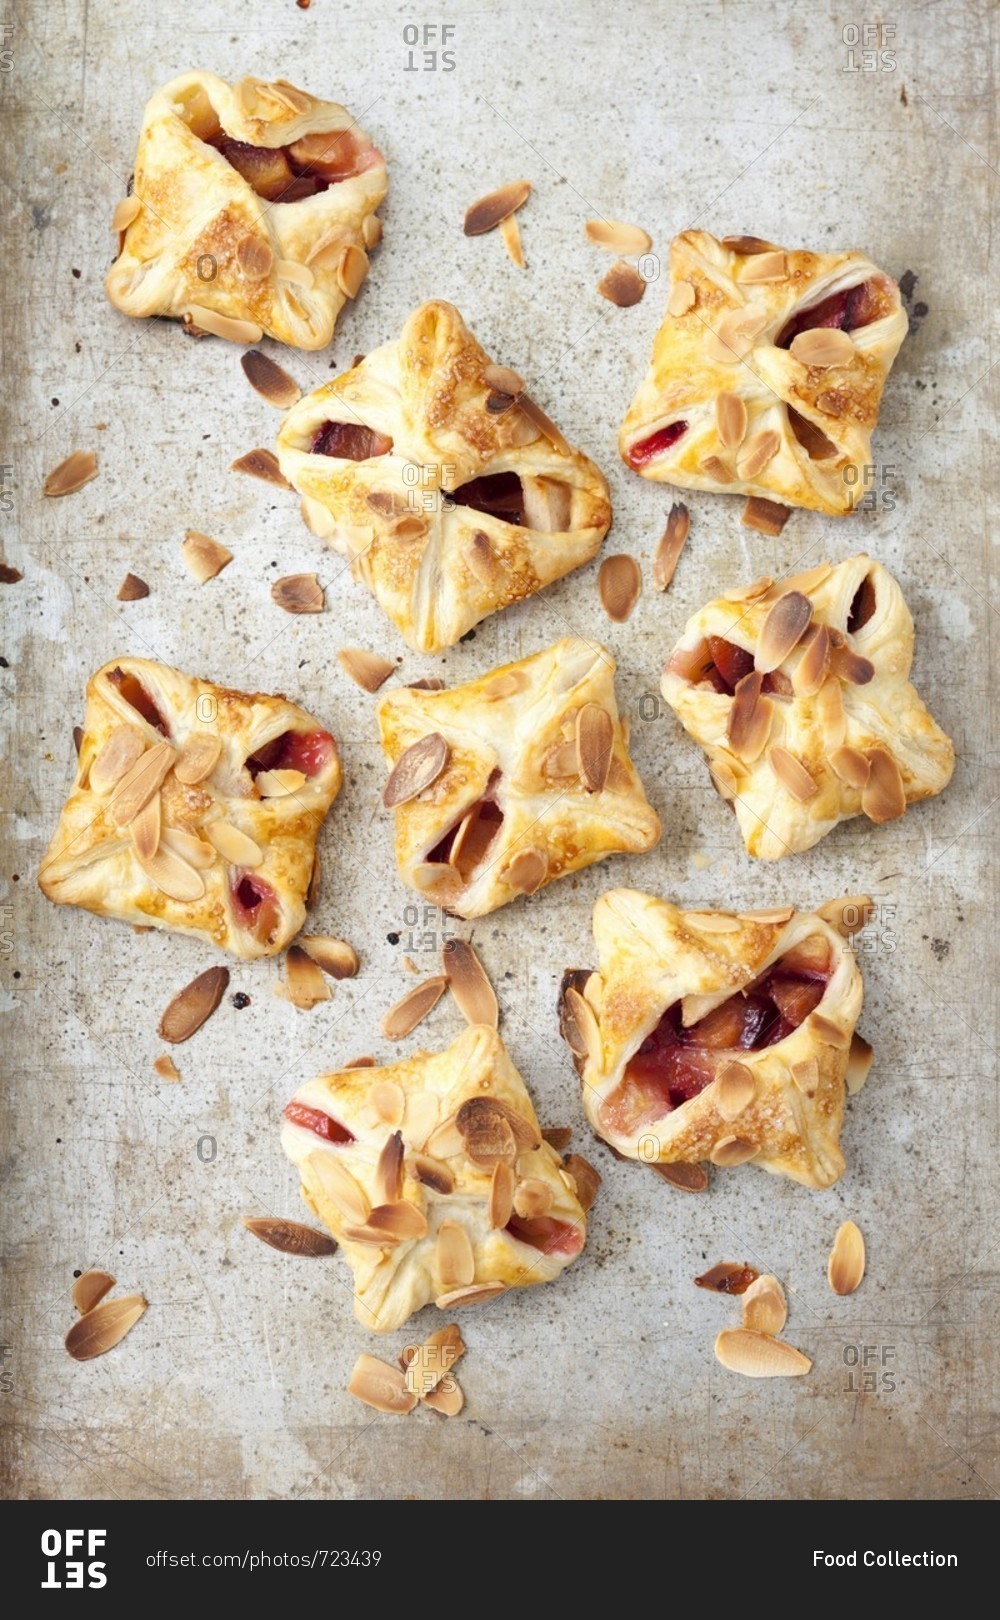 Puff pastry parcels with apples, plums and flaked almonds